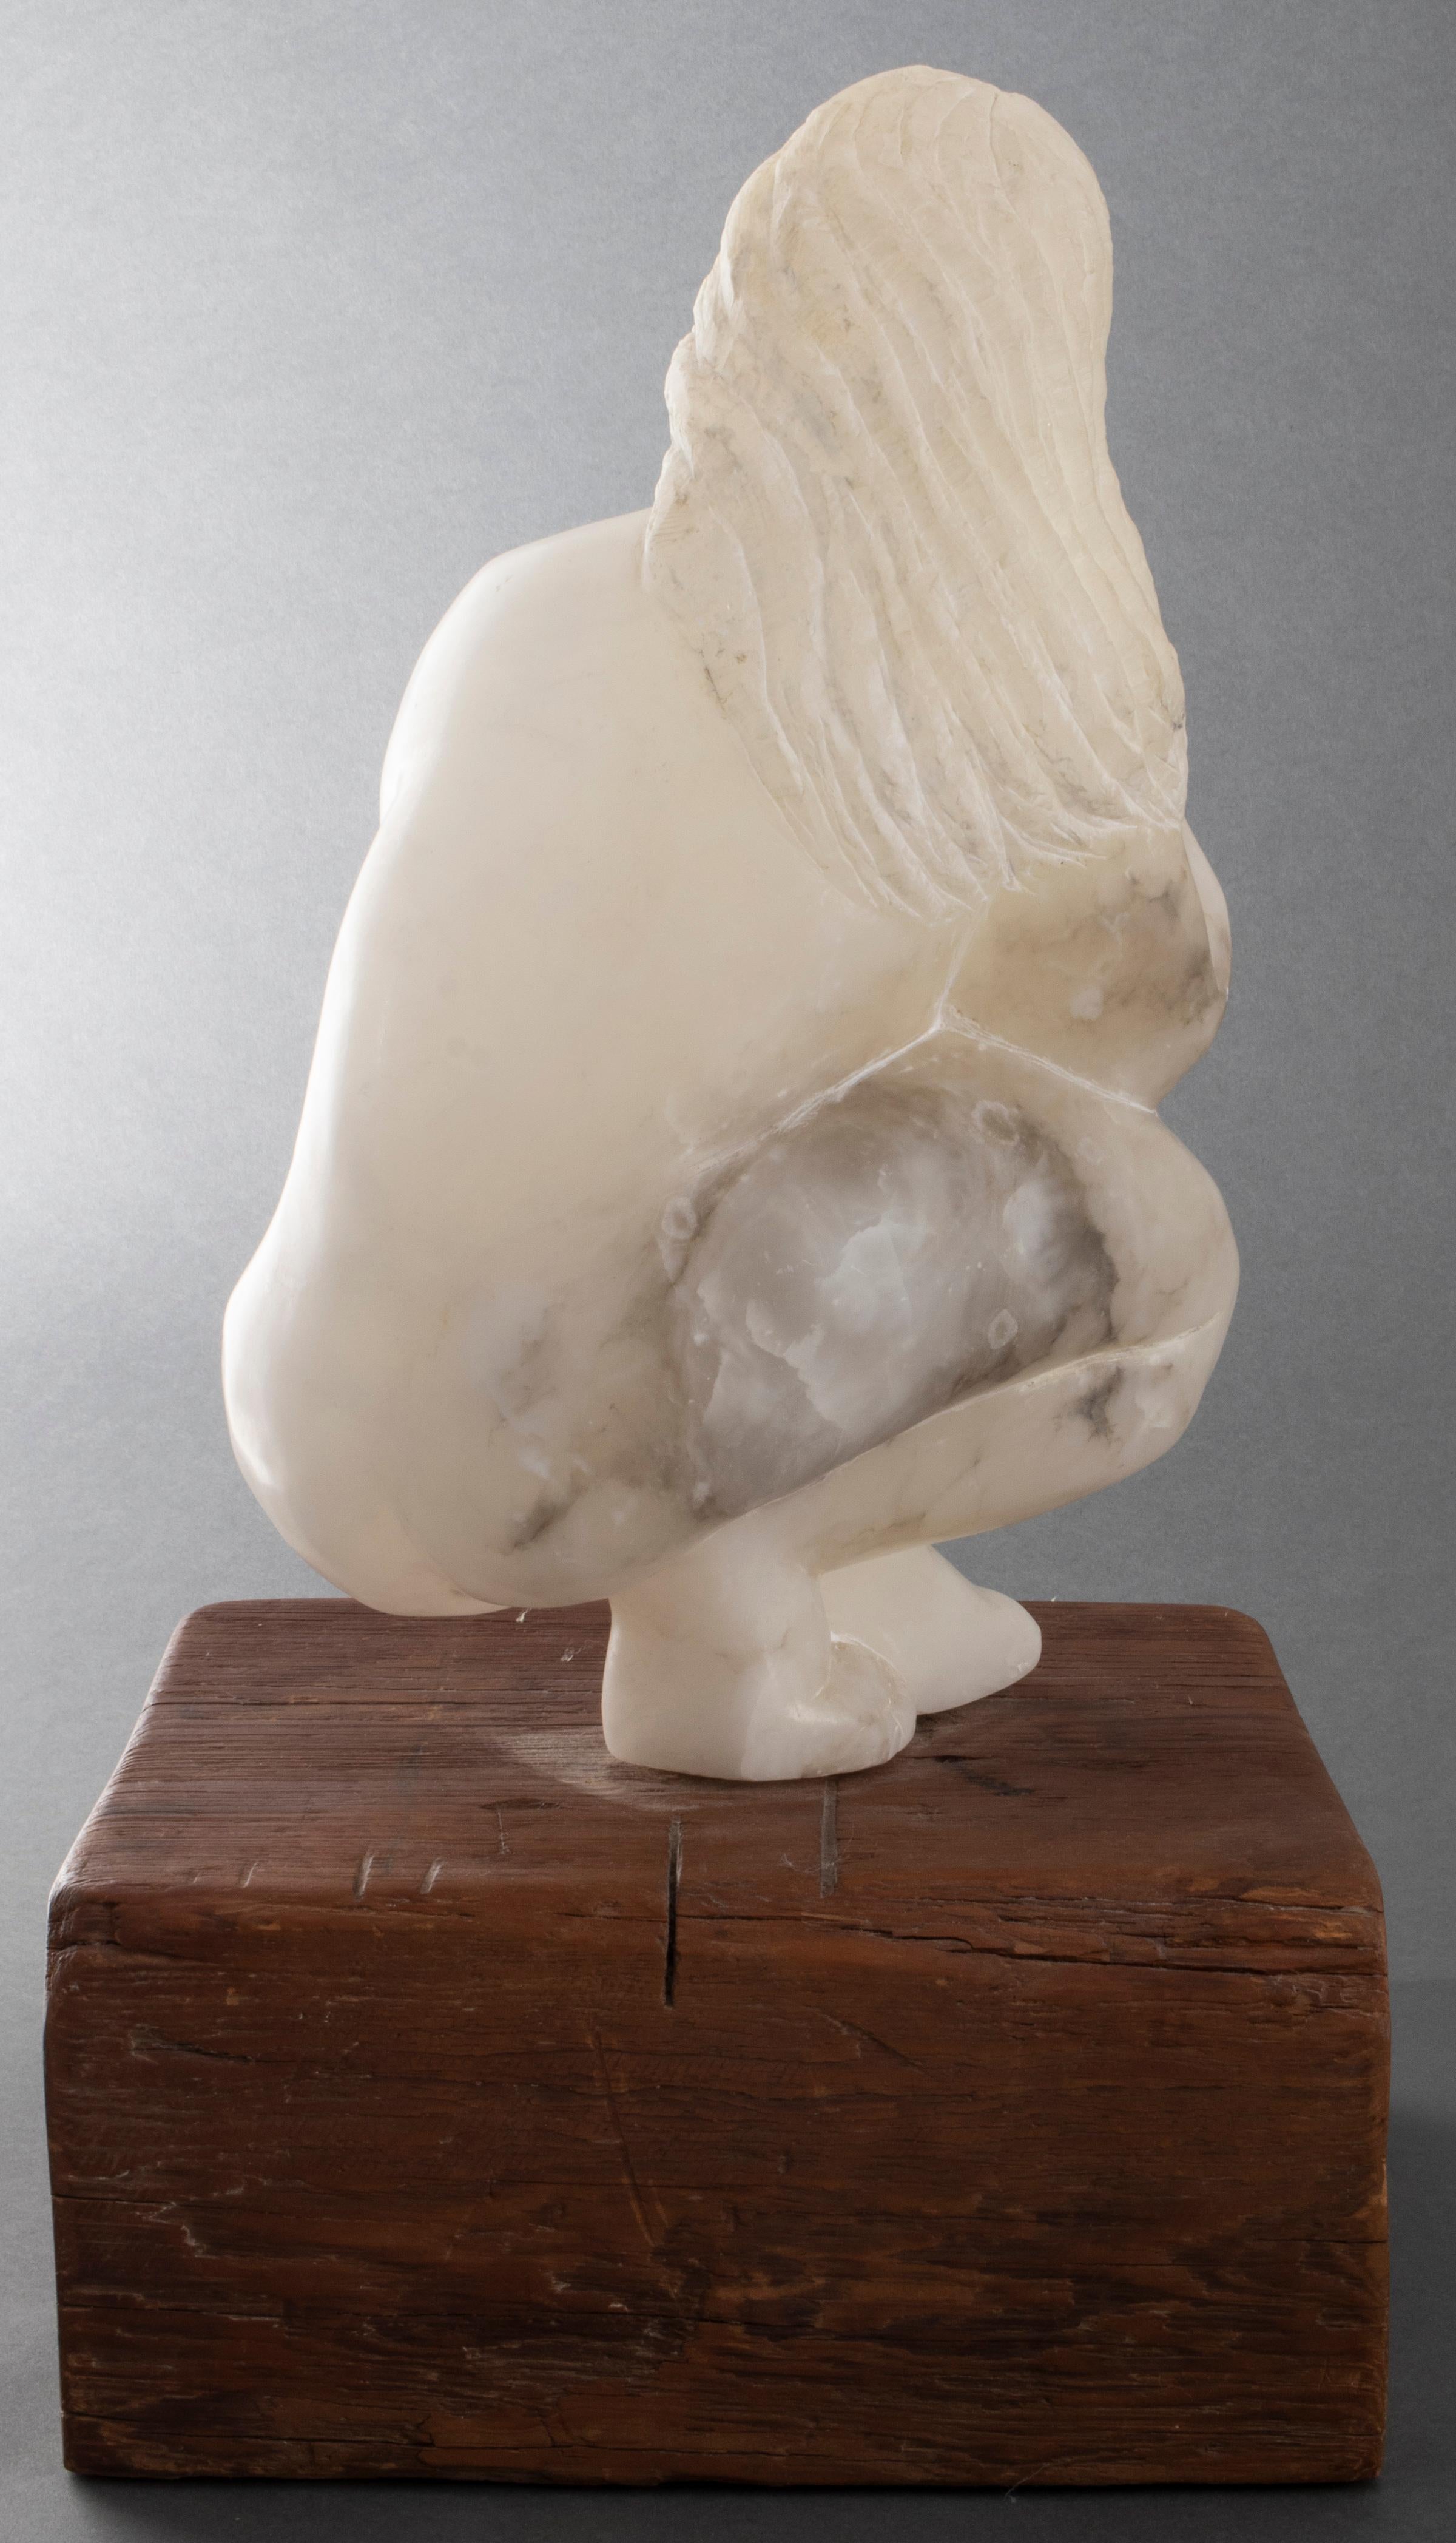 North American Modern J. West Signed Alabaster Sculpture of Woman